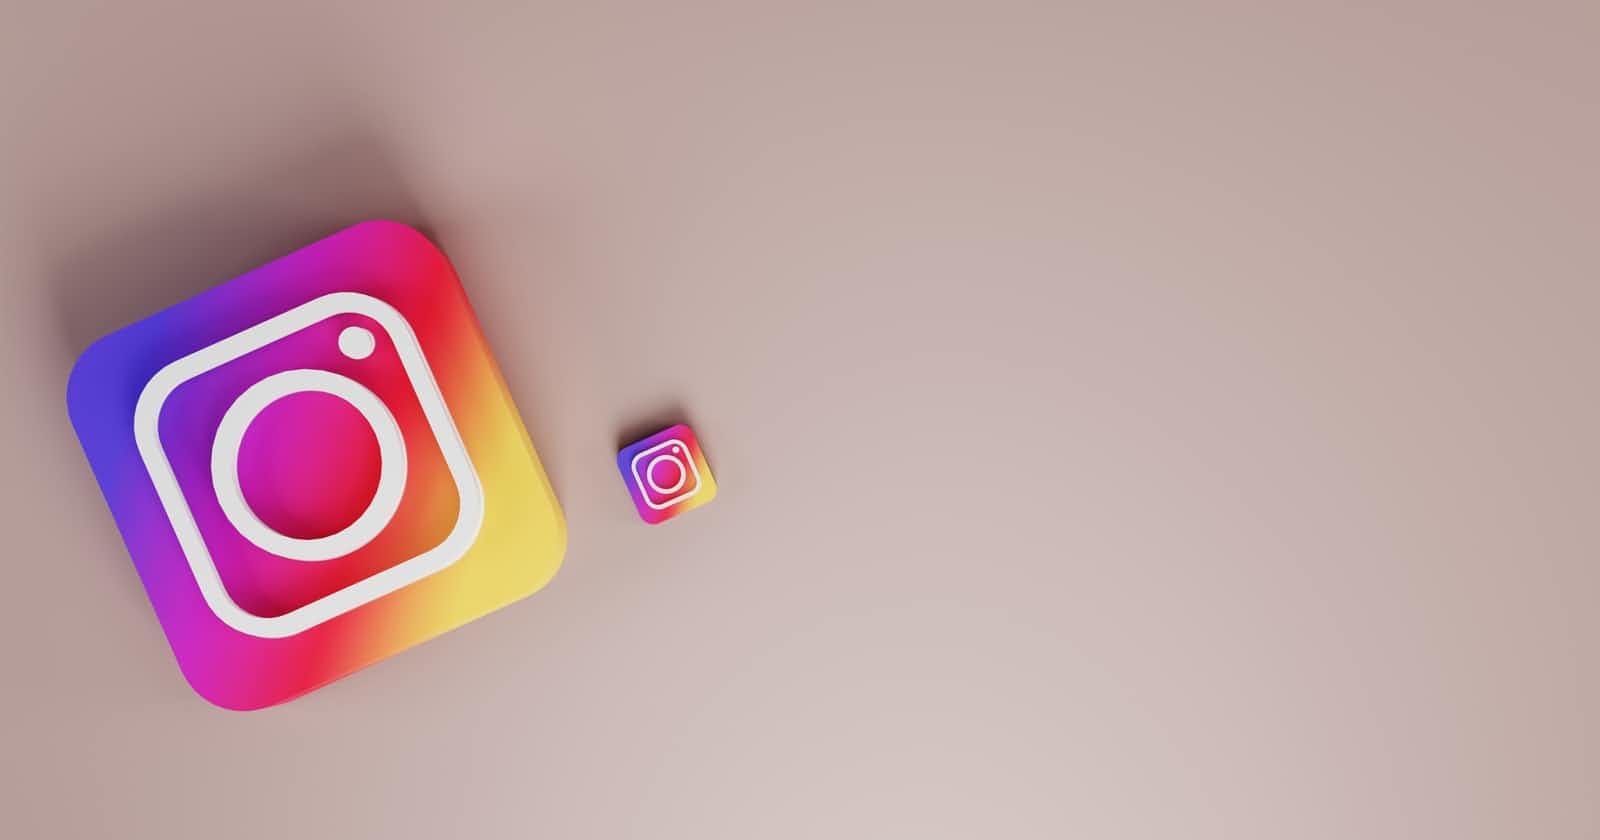 Building an instagram profile clone with html and css